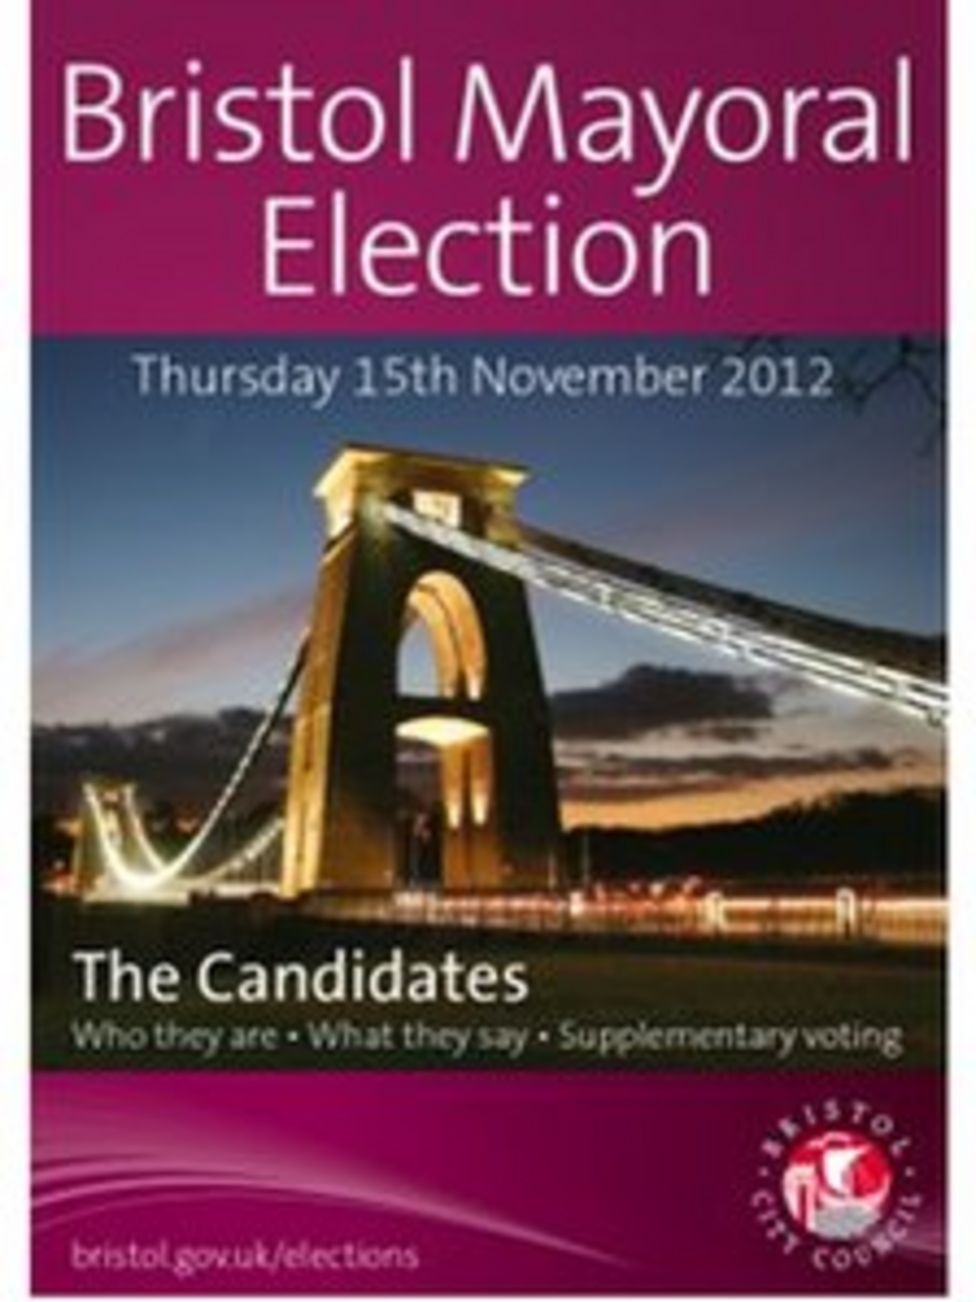 Bristol mayor Election candidates booklet posted BBC News